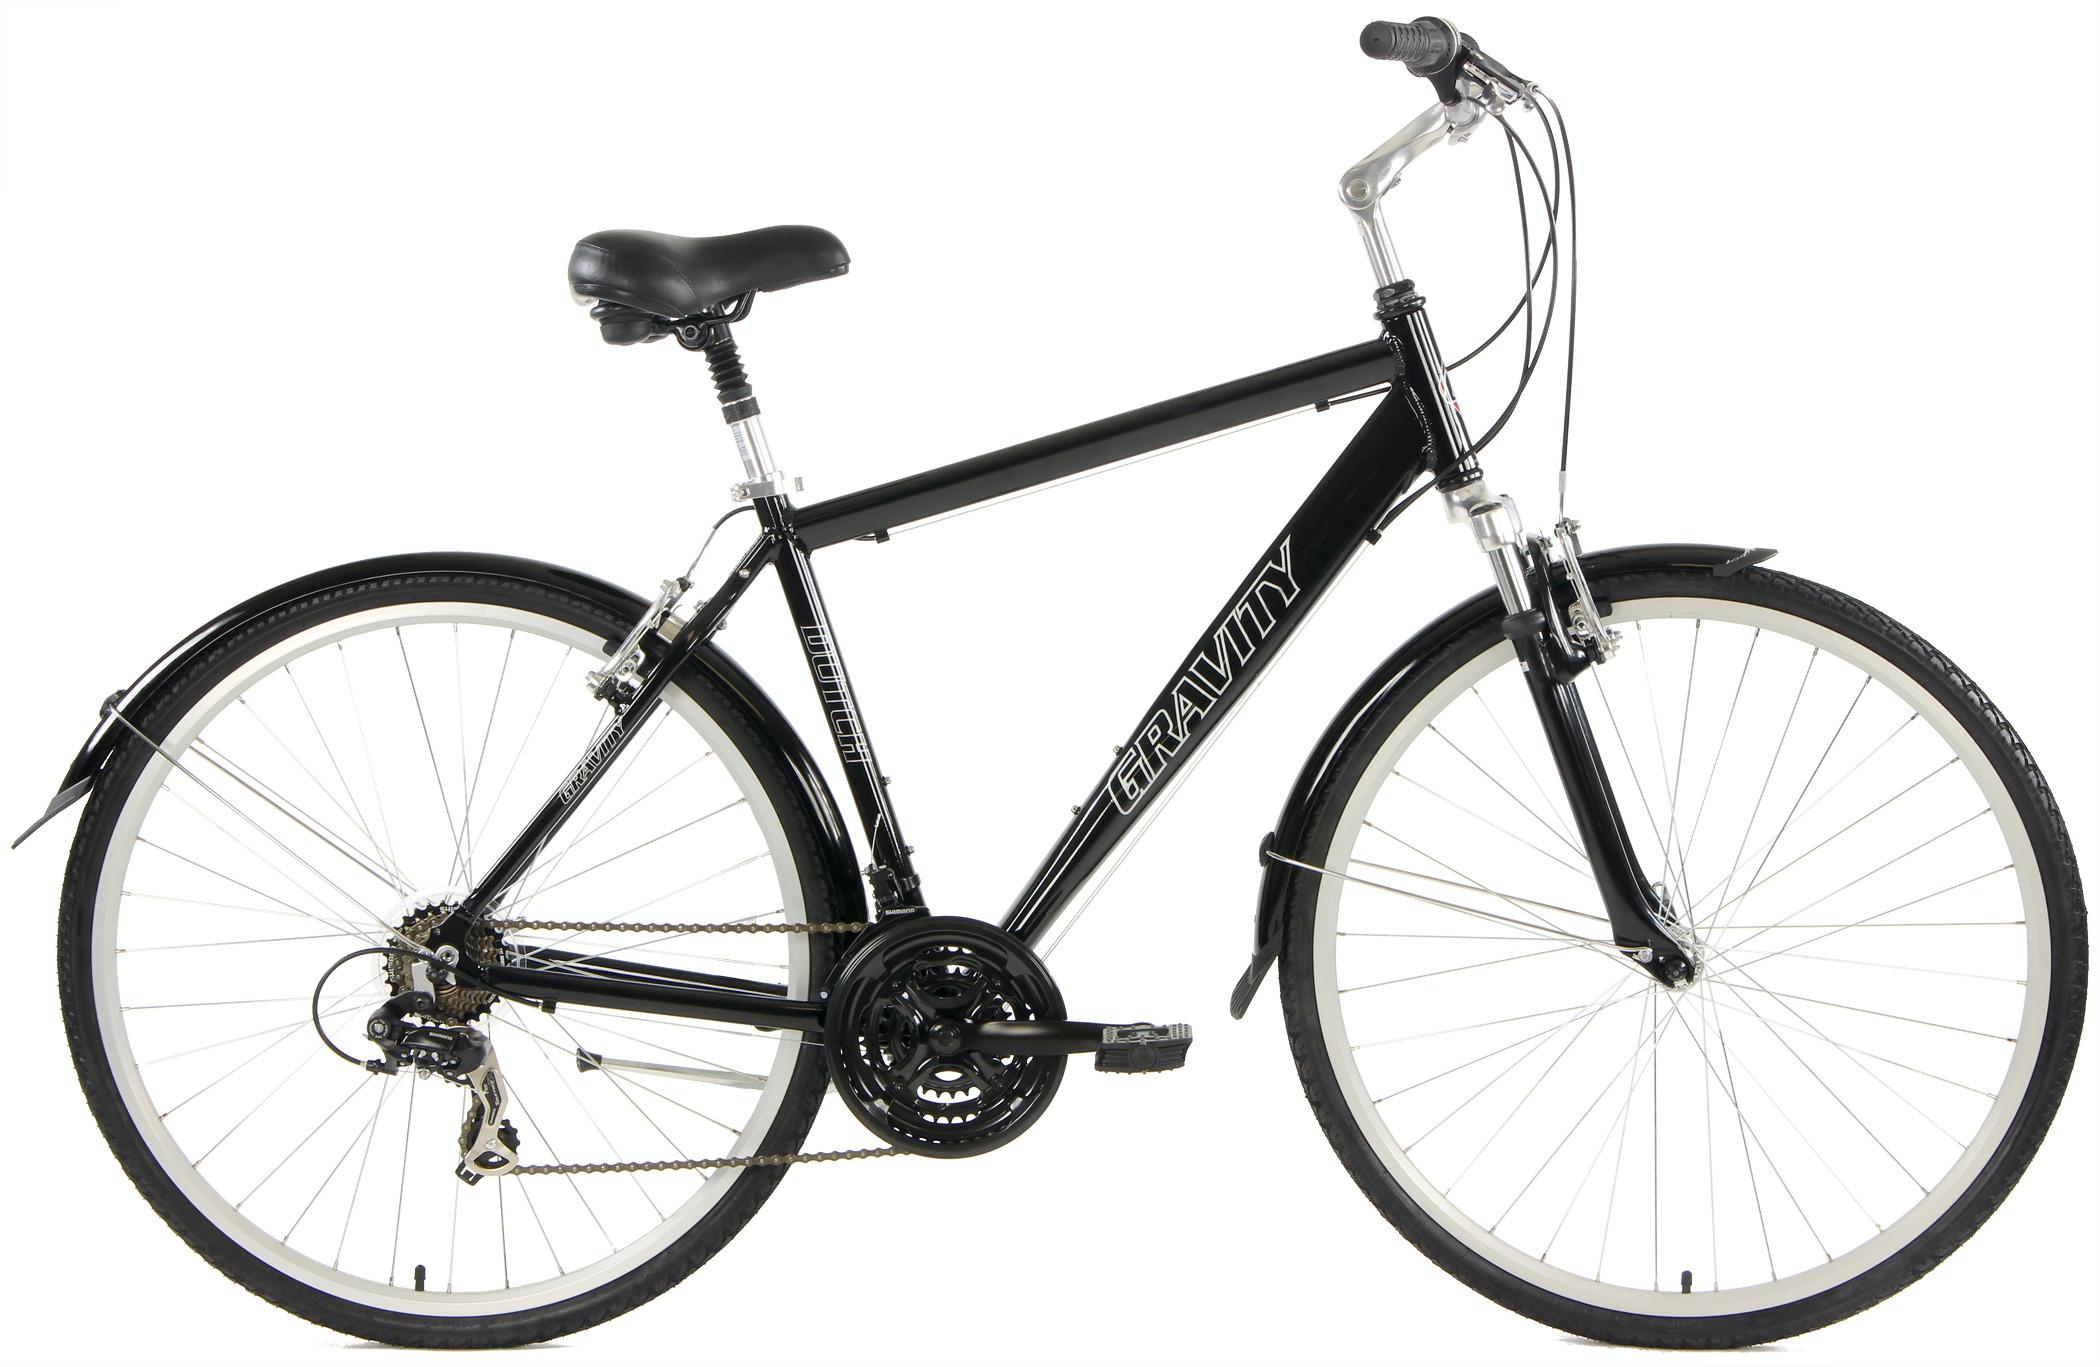 Save Up to 60% Off Bikes *ALL BIKES FREE SHIP 48US Gravity Dutch Hybrid, City, Commuter Bicycles Light/Strong Aluminum Hybrid Lifestyle Bikes with Comfy Upright Posture